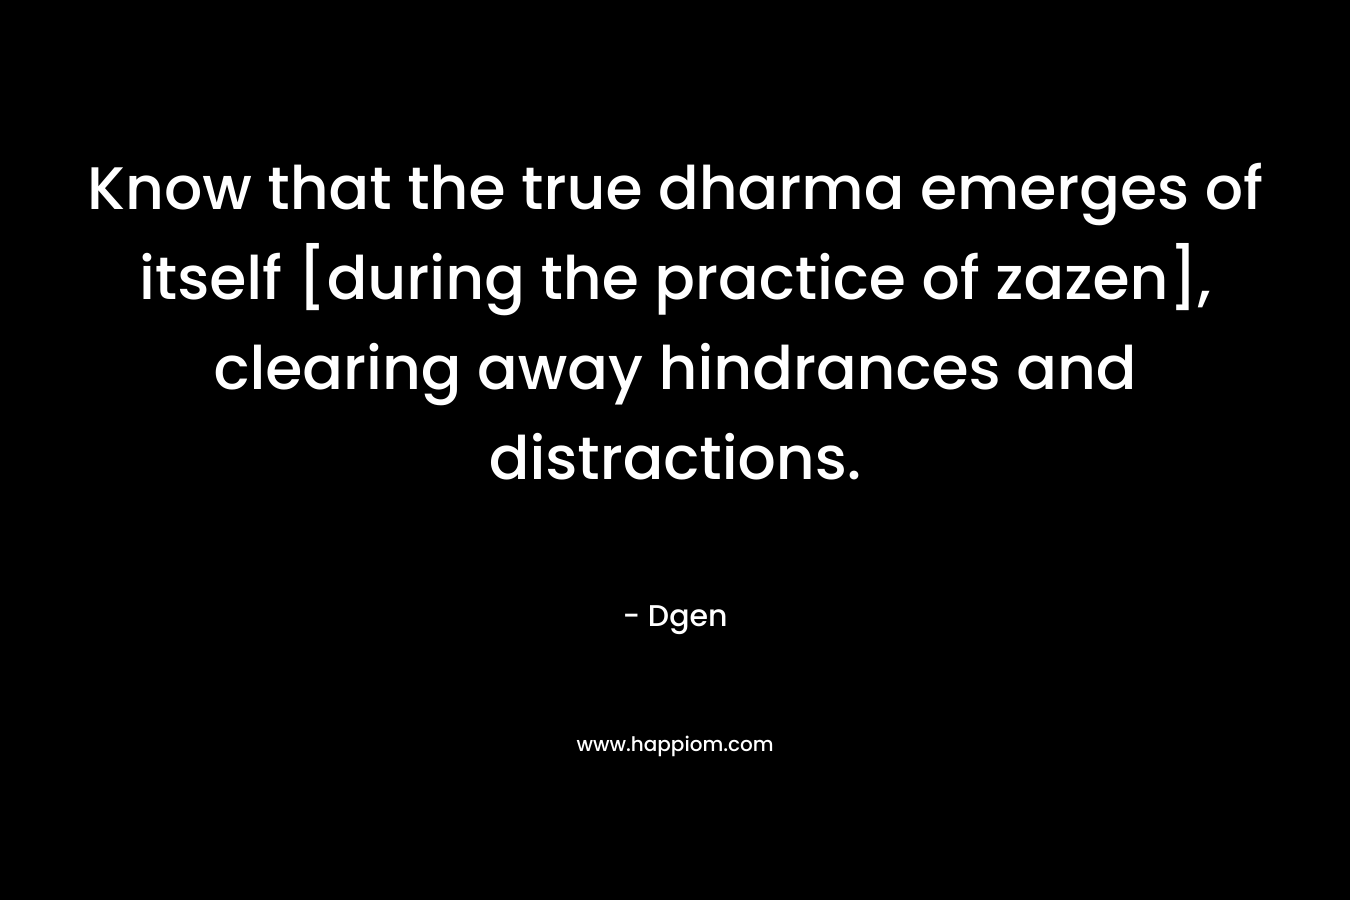 Know that the true dharma emerges of itself [during the practice of zazen], clearing away hindrances and distractions.